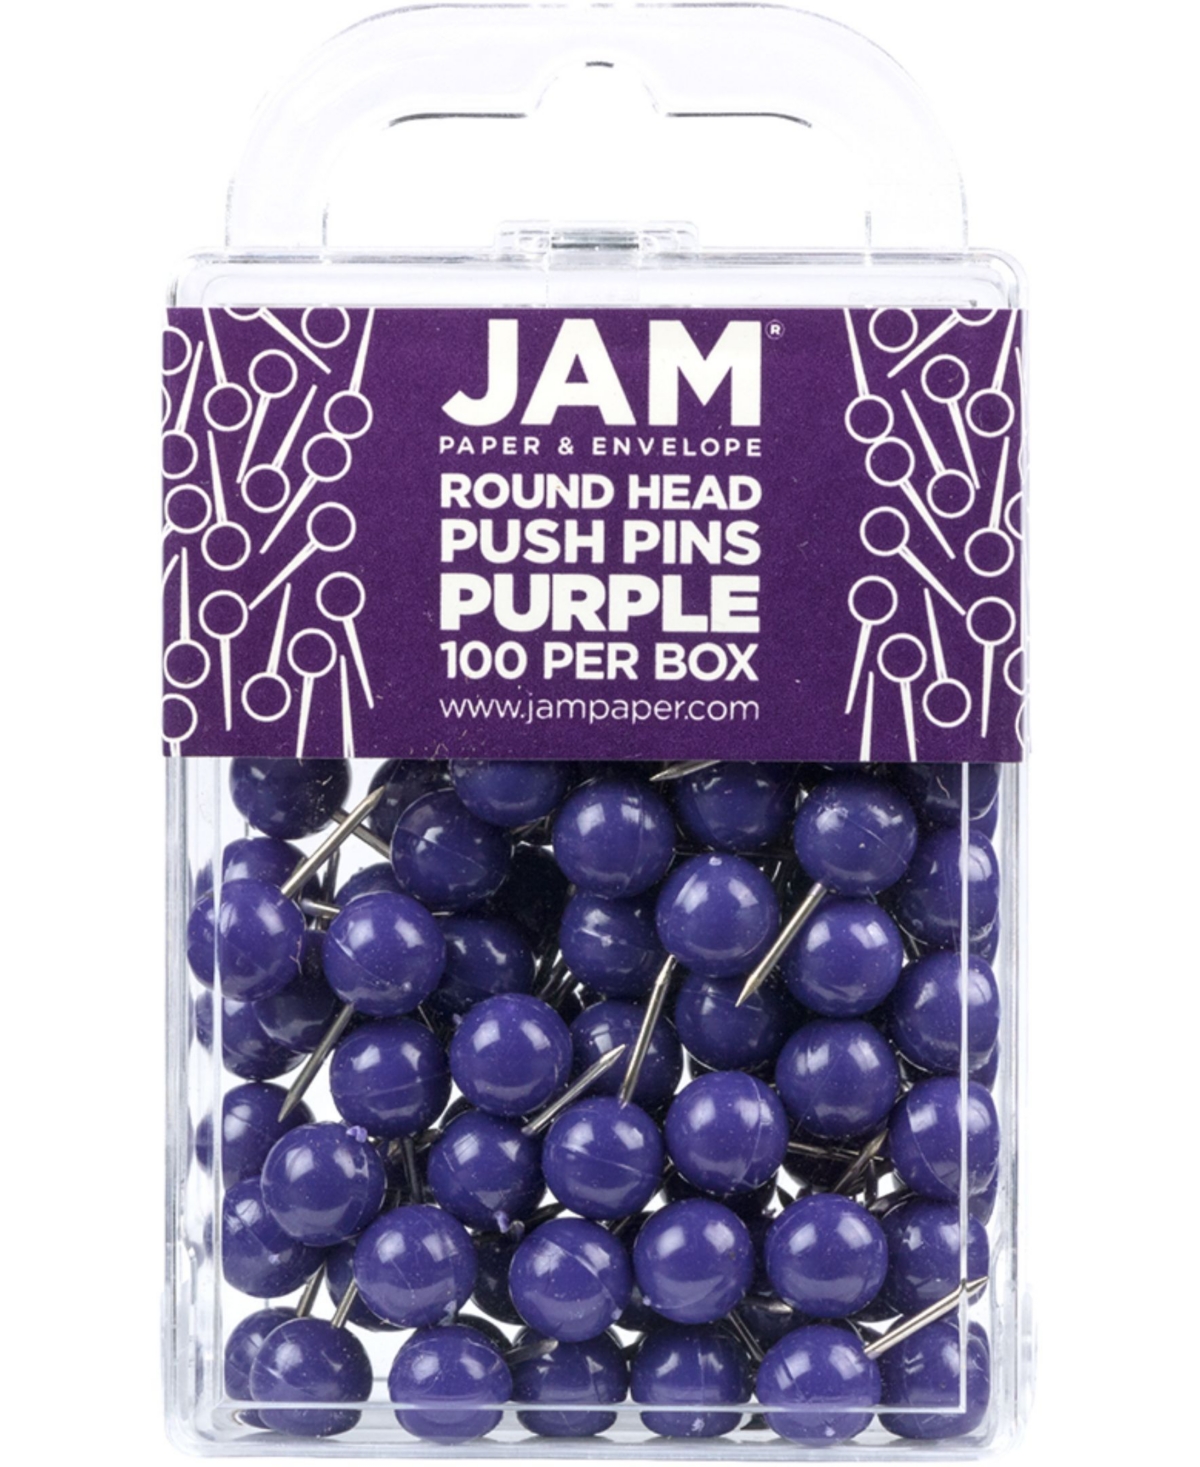 Jam Paper Colorful Push Pins In Purple